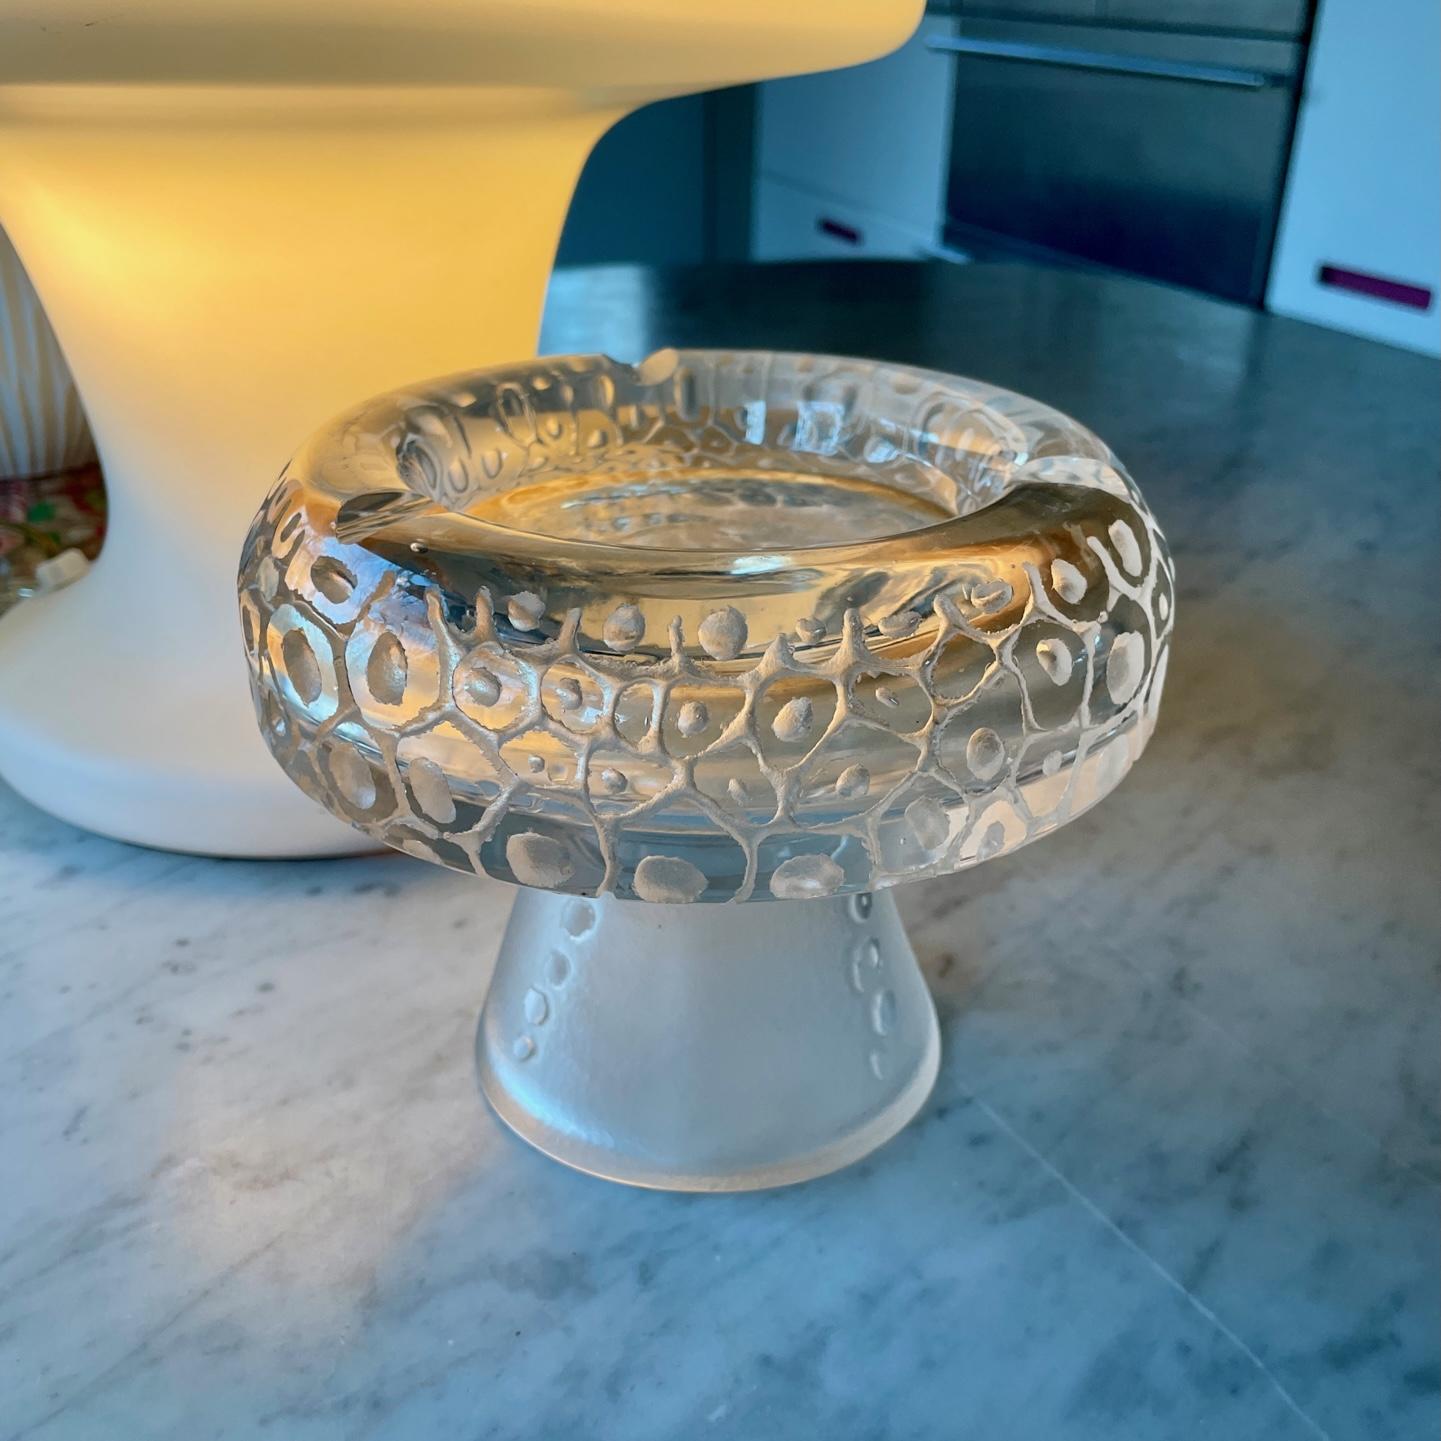 Wonderful footed heavy art glass footed cigar / cigarette ashtray / dish.  No chips, No cracks. Unsigned, Estimated Age and Origin.

Dia 6 5/8 x H 5 1/4 in.
Wt. 5 lbs. 2 oz.


